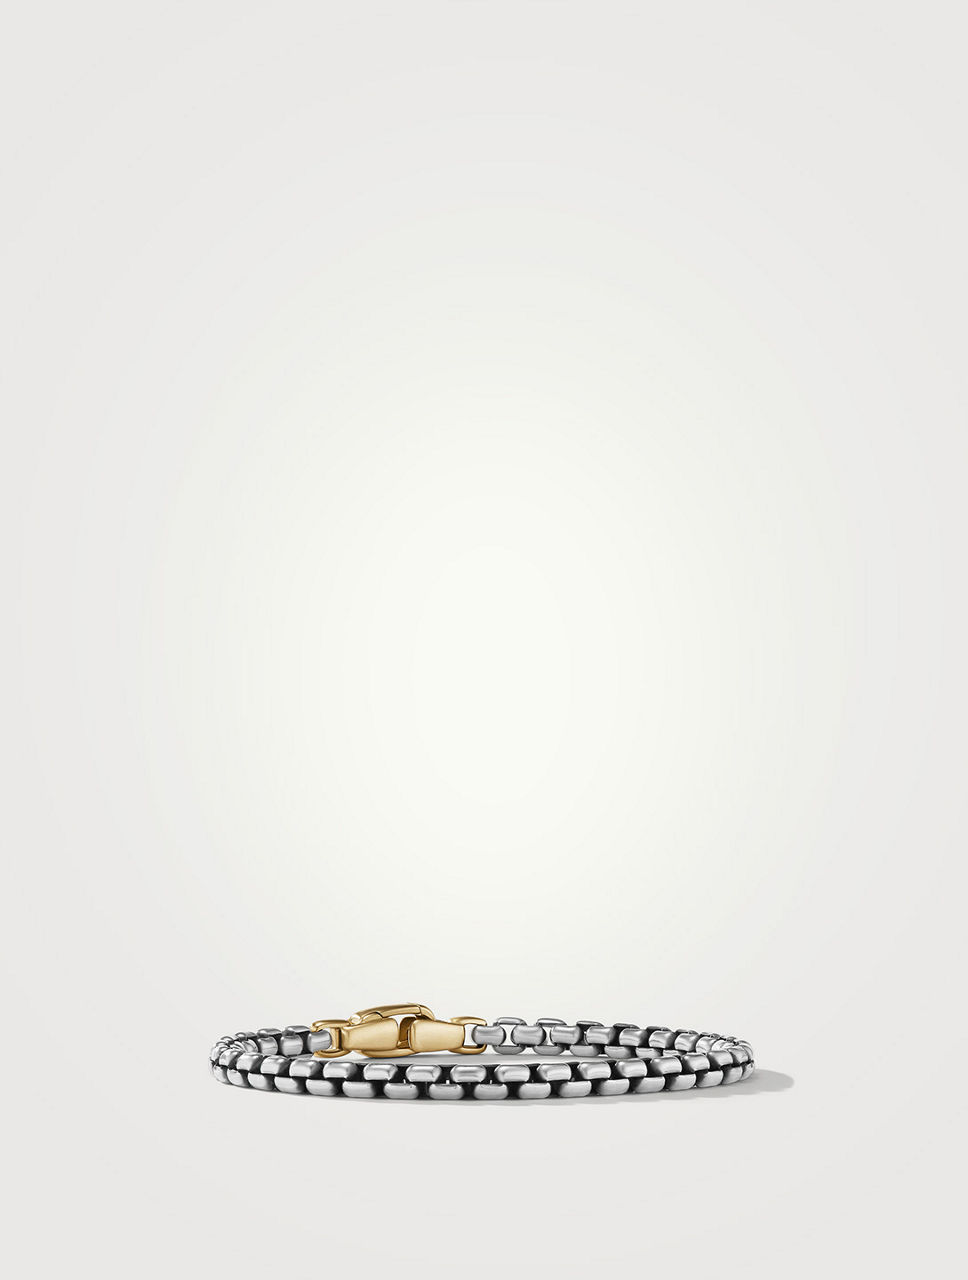 Box Chain Bracelet Sterling Silver With 14k Yellow Gold